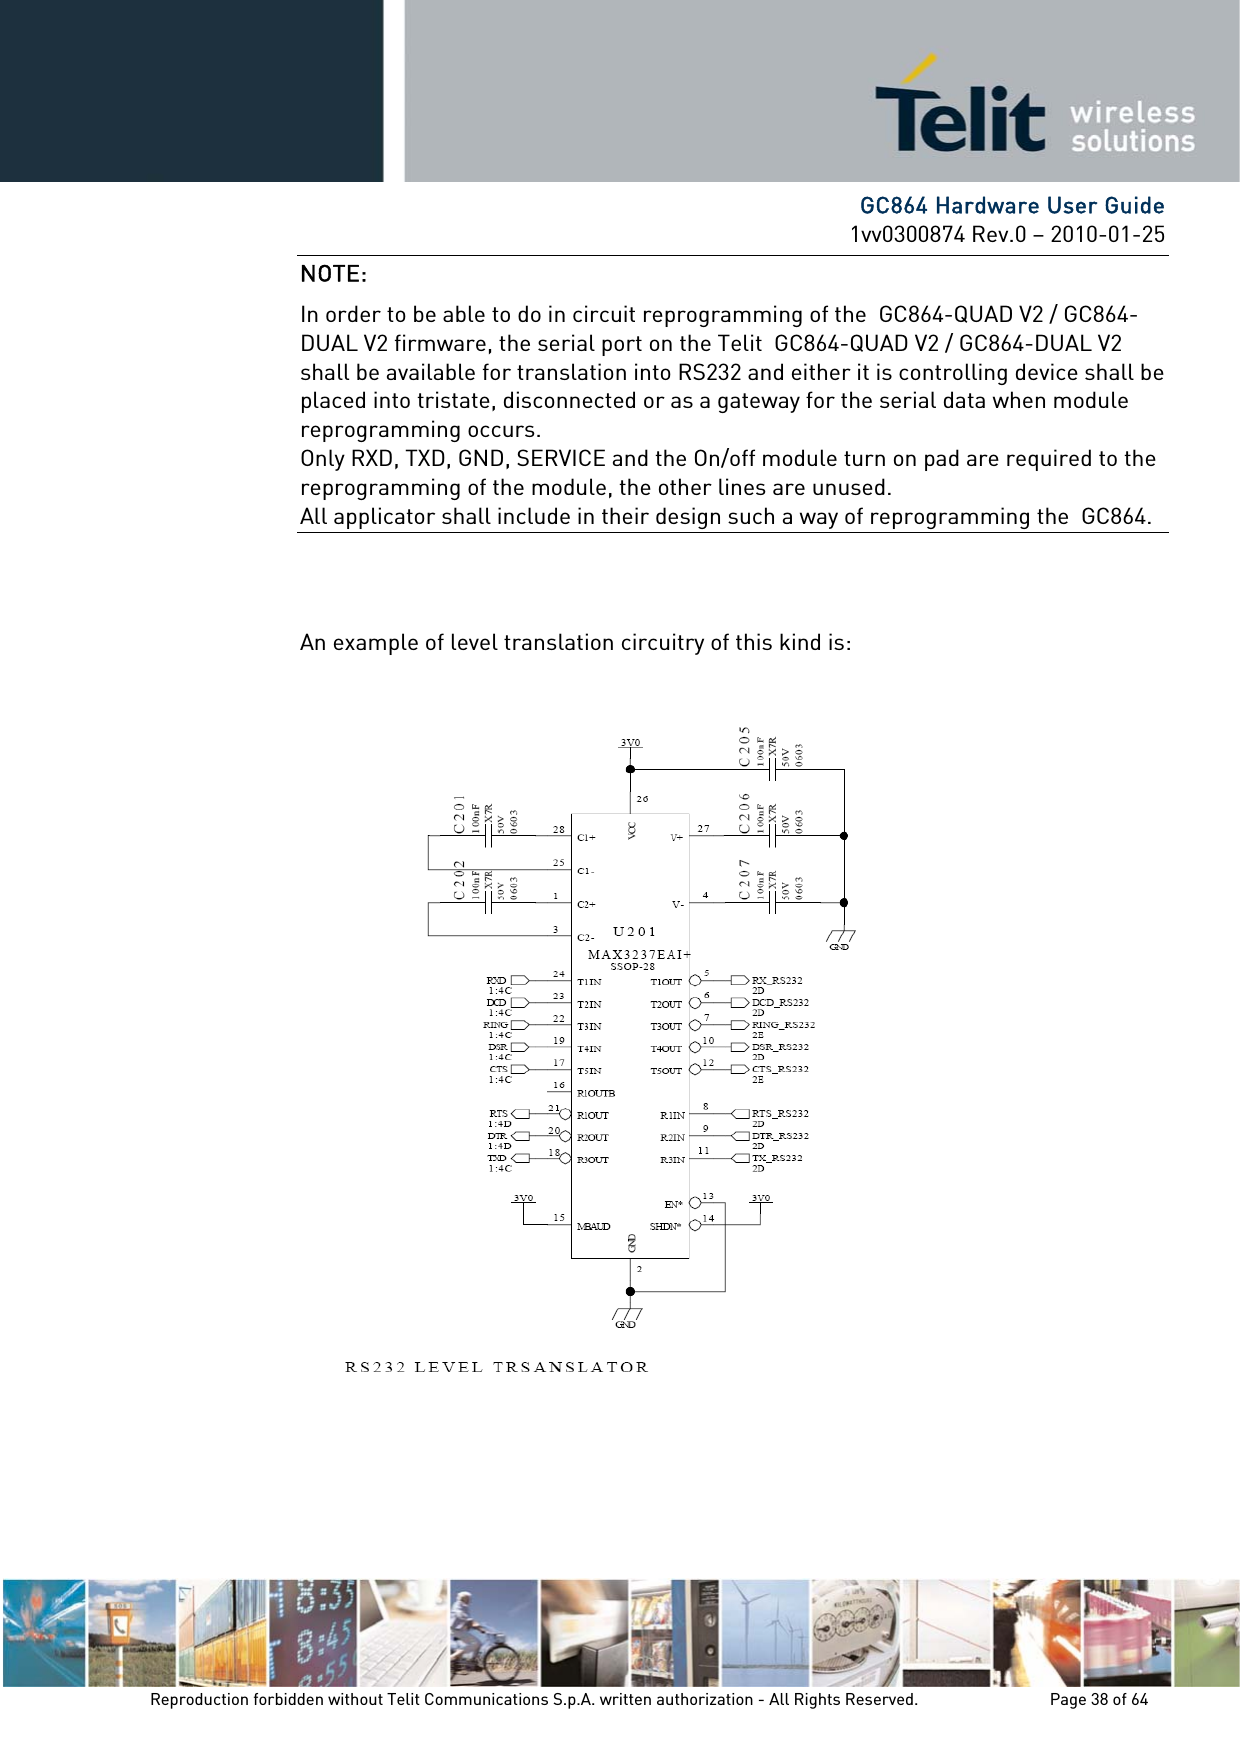      GC864 Hardware User Guide 1vv0300874 Rev.0 – 2010-01-25 Reproduction forbidden without Telit Communications S.p.A. written authorization - All Rights Reserved.    Page 38 of 64  NOTE: In order to be able to do in circuit reprogramming of the  GC864-QUAD V2 / GC864-DUAL V2 firmware, the serial port on the Telit  GC864-QUAD V2 / GC864-DUAL V2 shall be available for translation into RS232 and either it is controlling device shall be placed into tristate, disconnected or as a gateway for the serial data when module reprogramming occurs. Only RXD, TXD, GND, SERVICE and the On/off module turn on pad are required to the reprogramming of the module, the other lines are unused. All applicator shall include in their design such a way of reprogramming the  GC864.   An example of level translation circuitry of this kind is:    